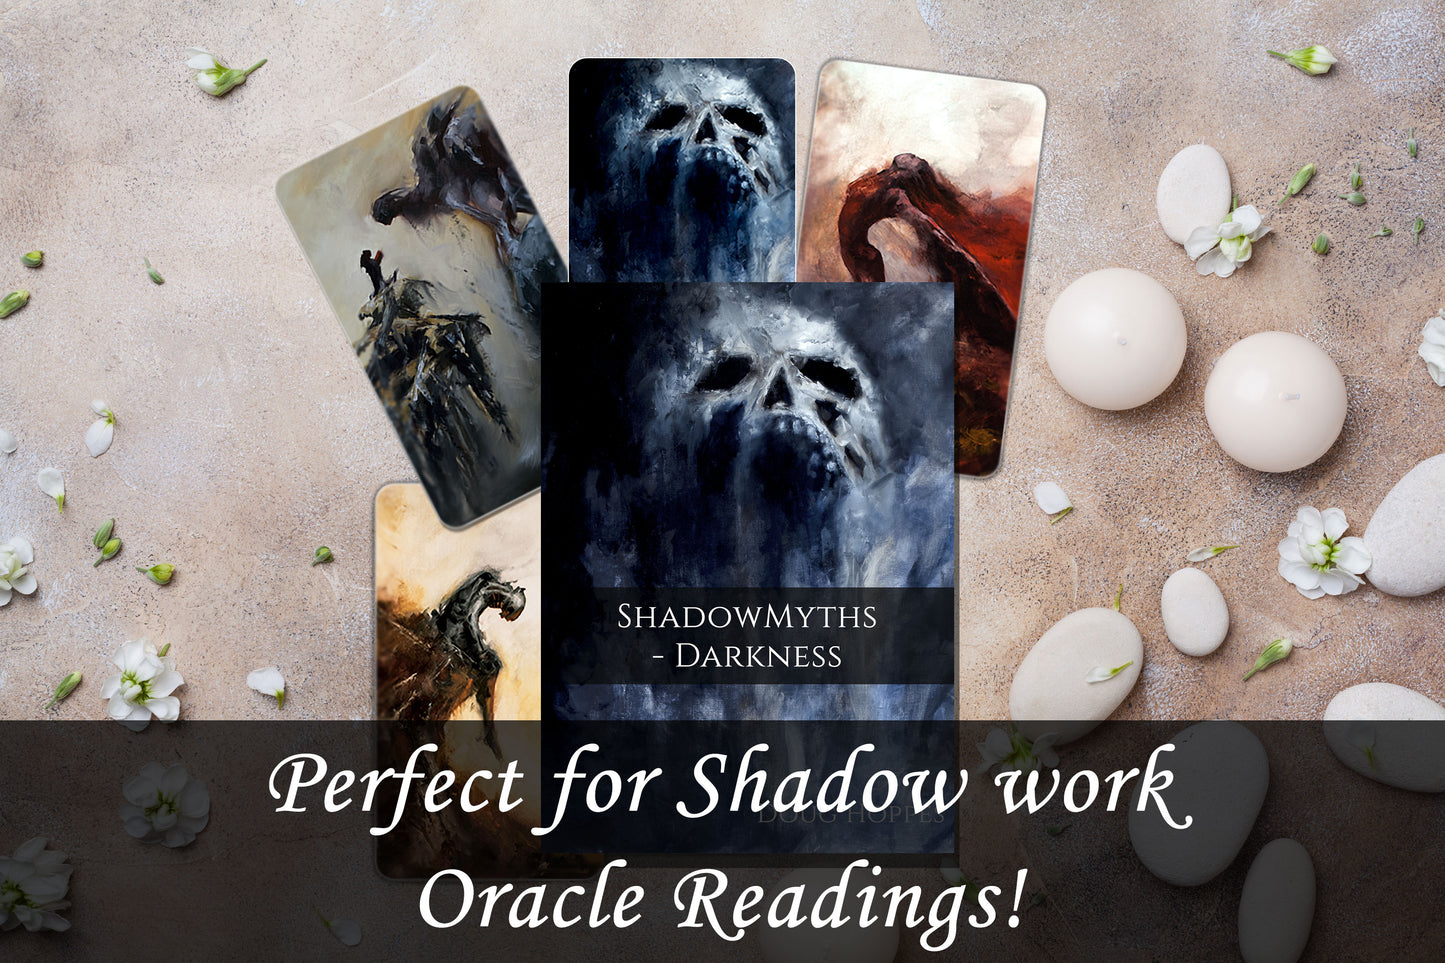 Darkness Deck with Downloadable Content Used for Oracle Reading, Dungeons and Dragons and Story Ideas